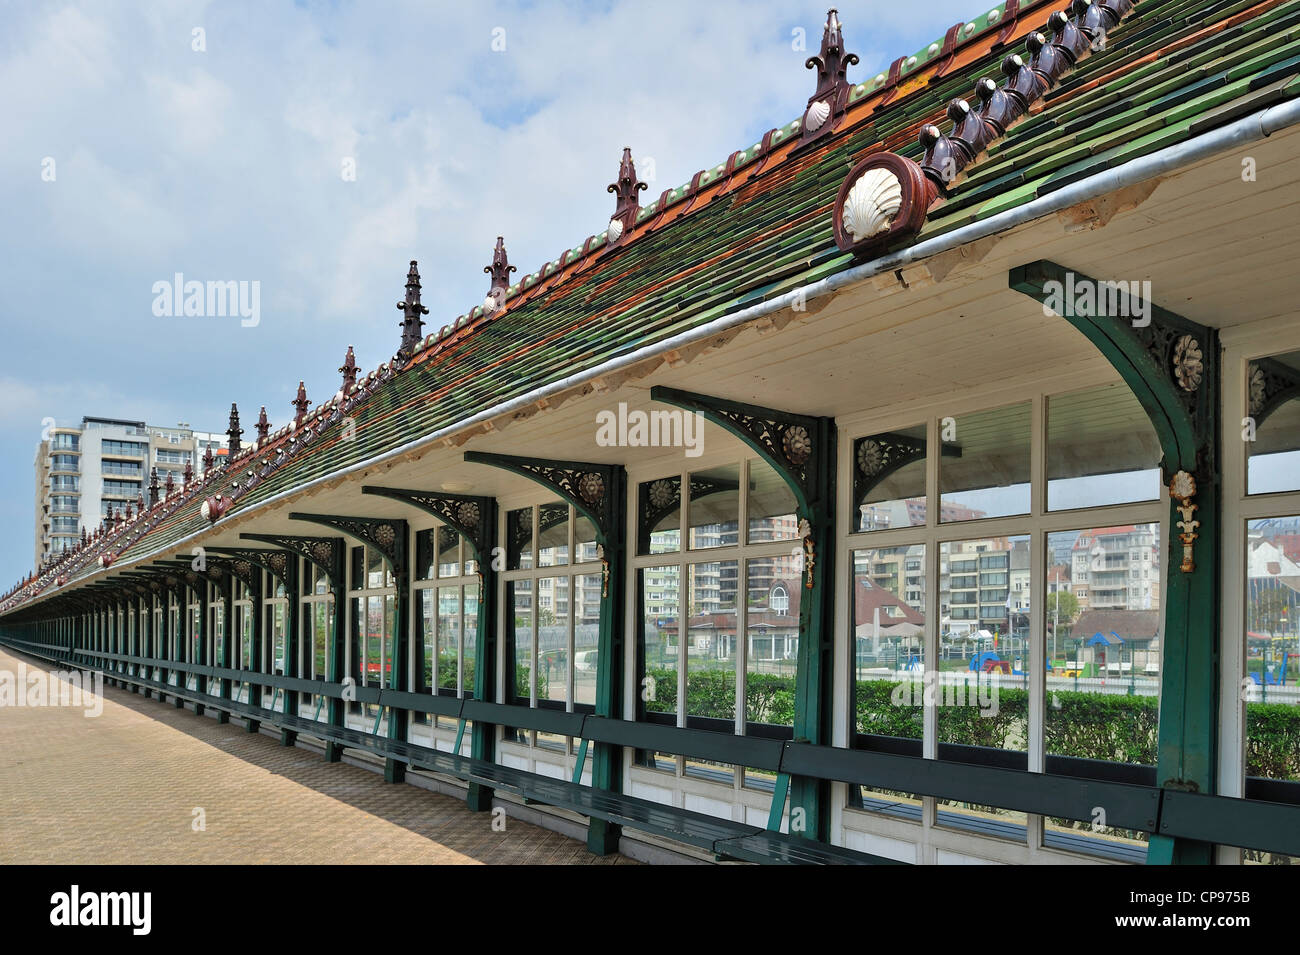 The Paravang, a windbreak dating from the Belle Epoque at the seaside resort Blankenberge along the North Sea coast, Belgium Stock Photo